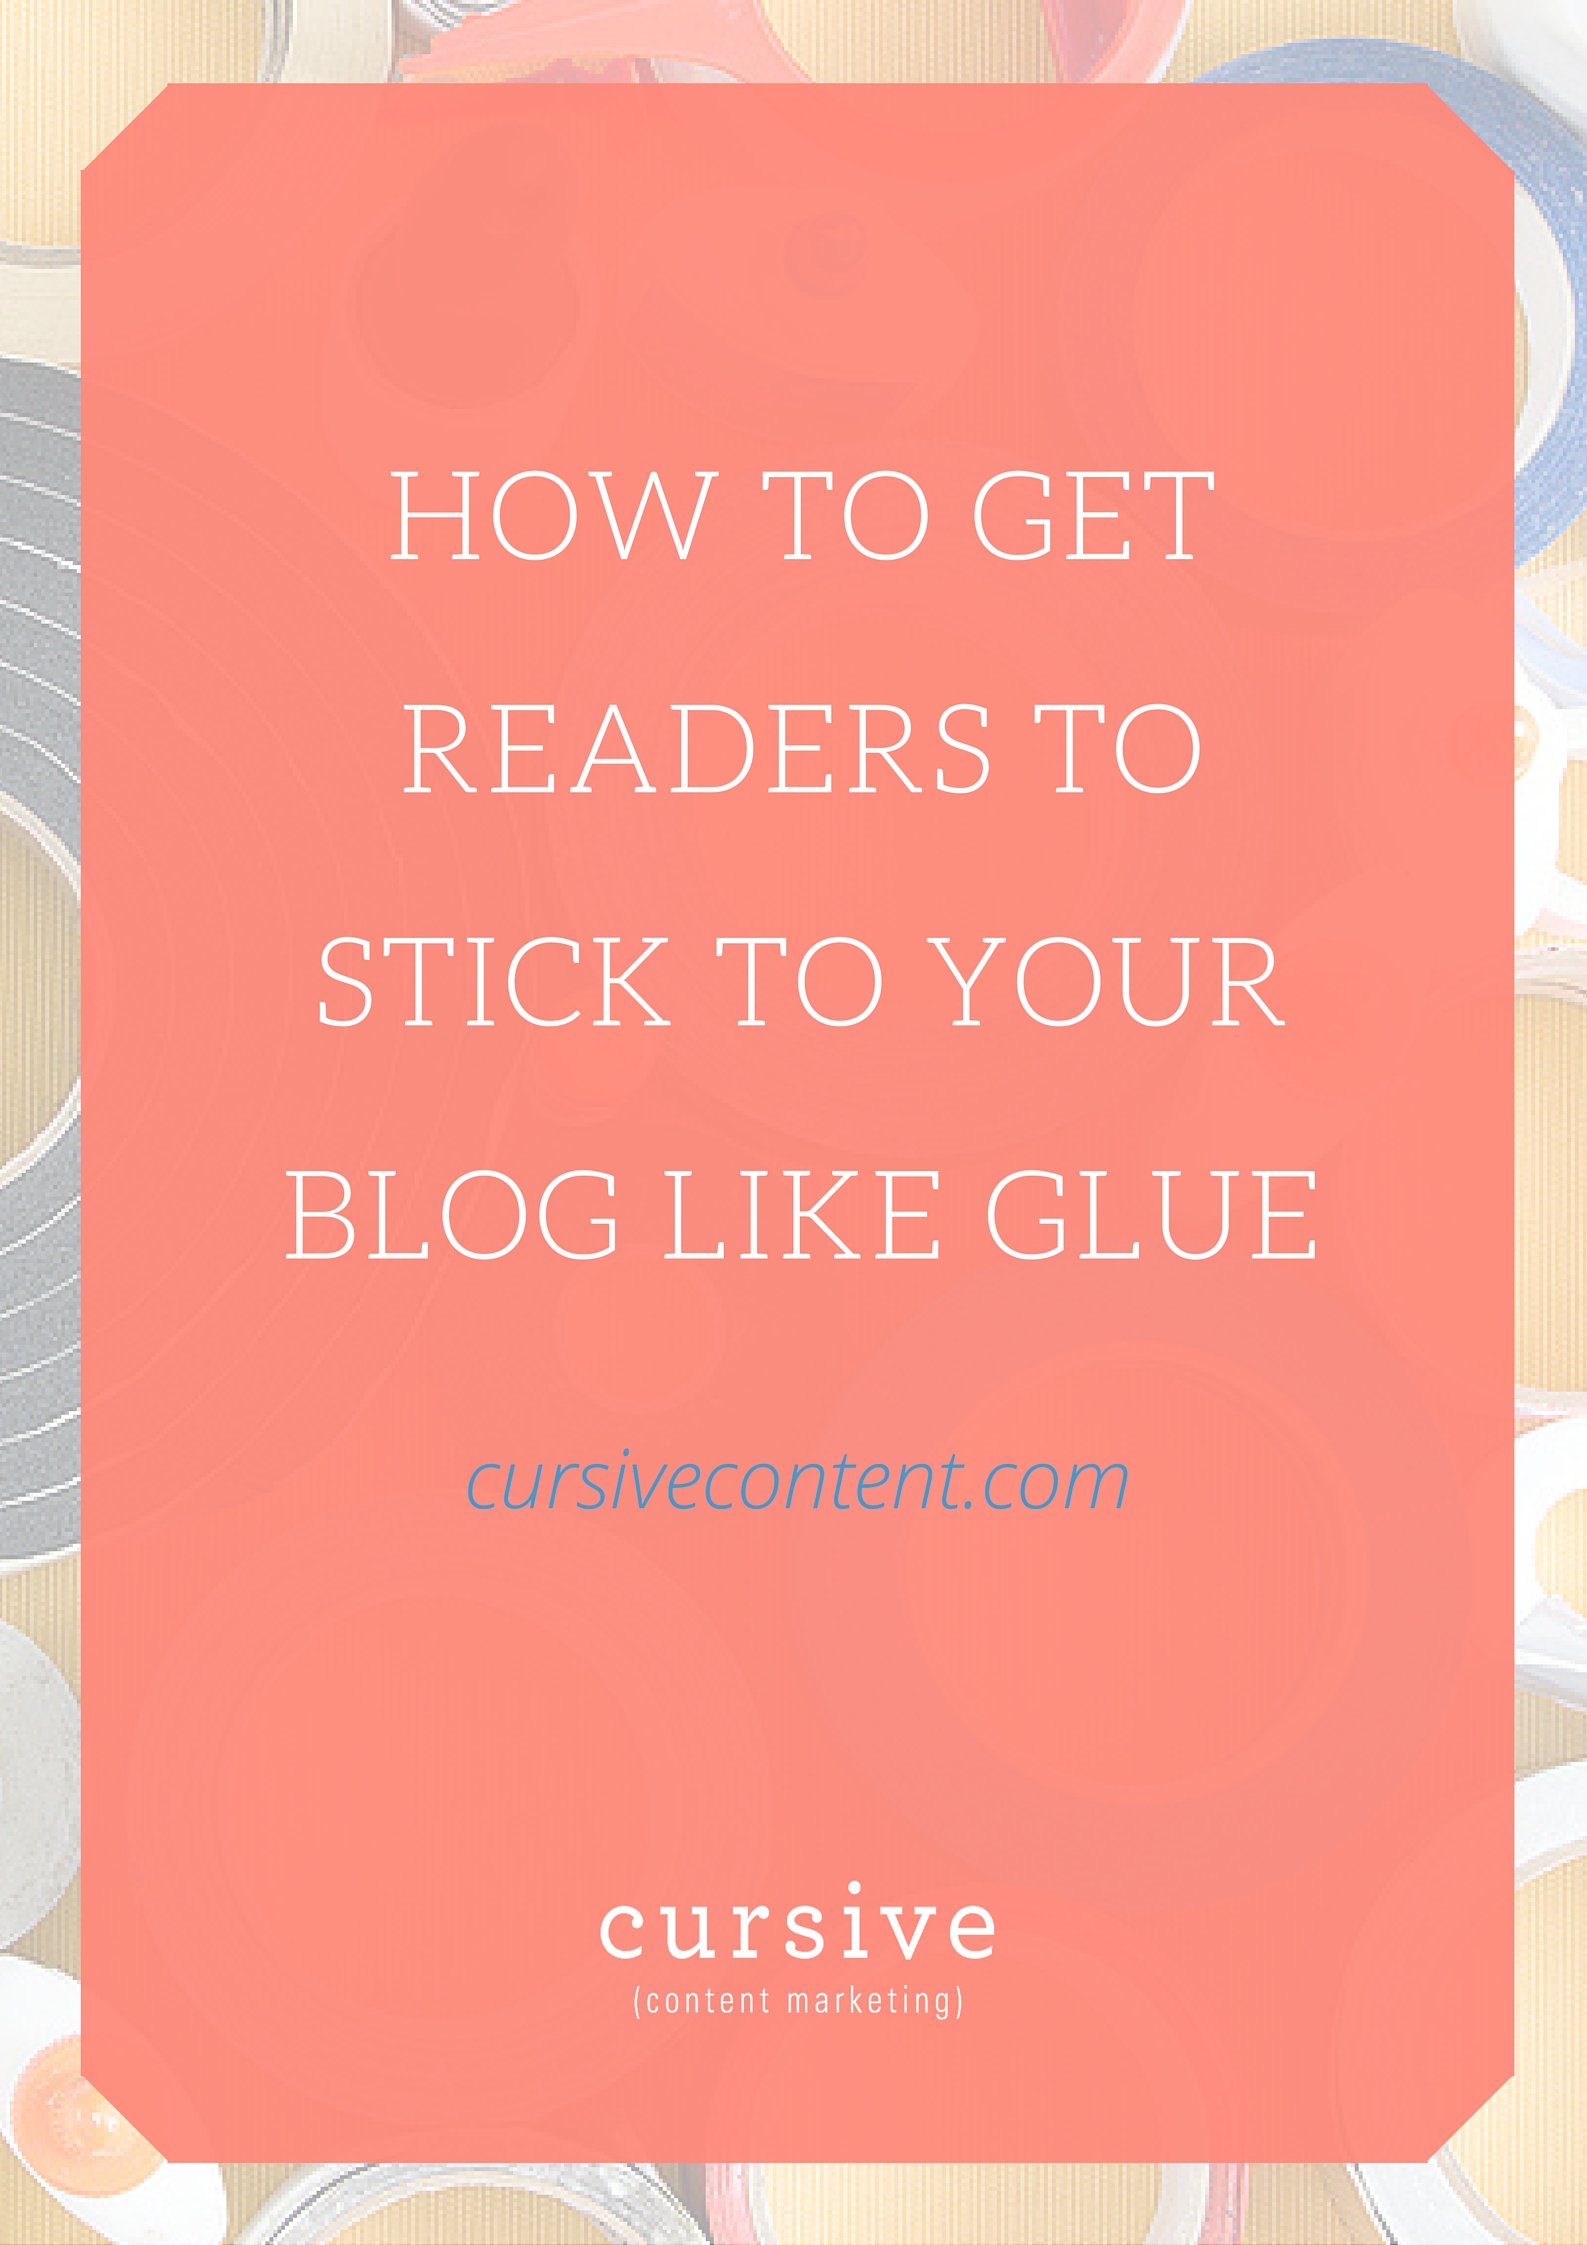 How to Get Readers to Stick to Your Blog Like Glue